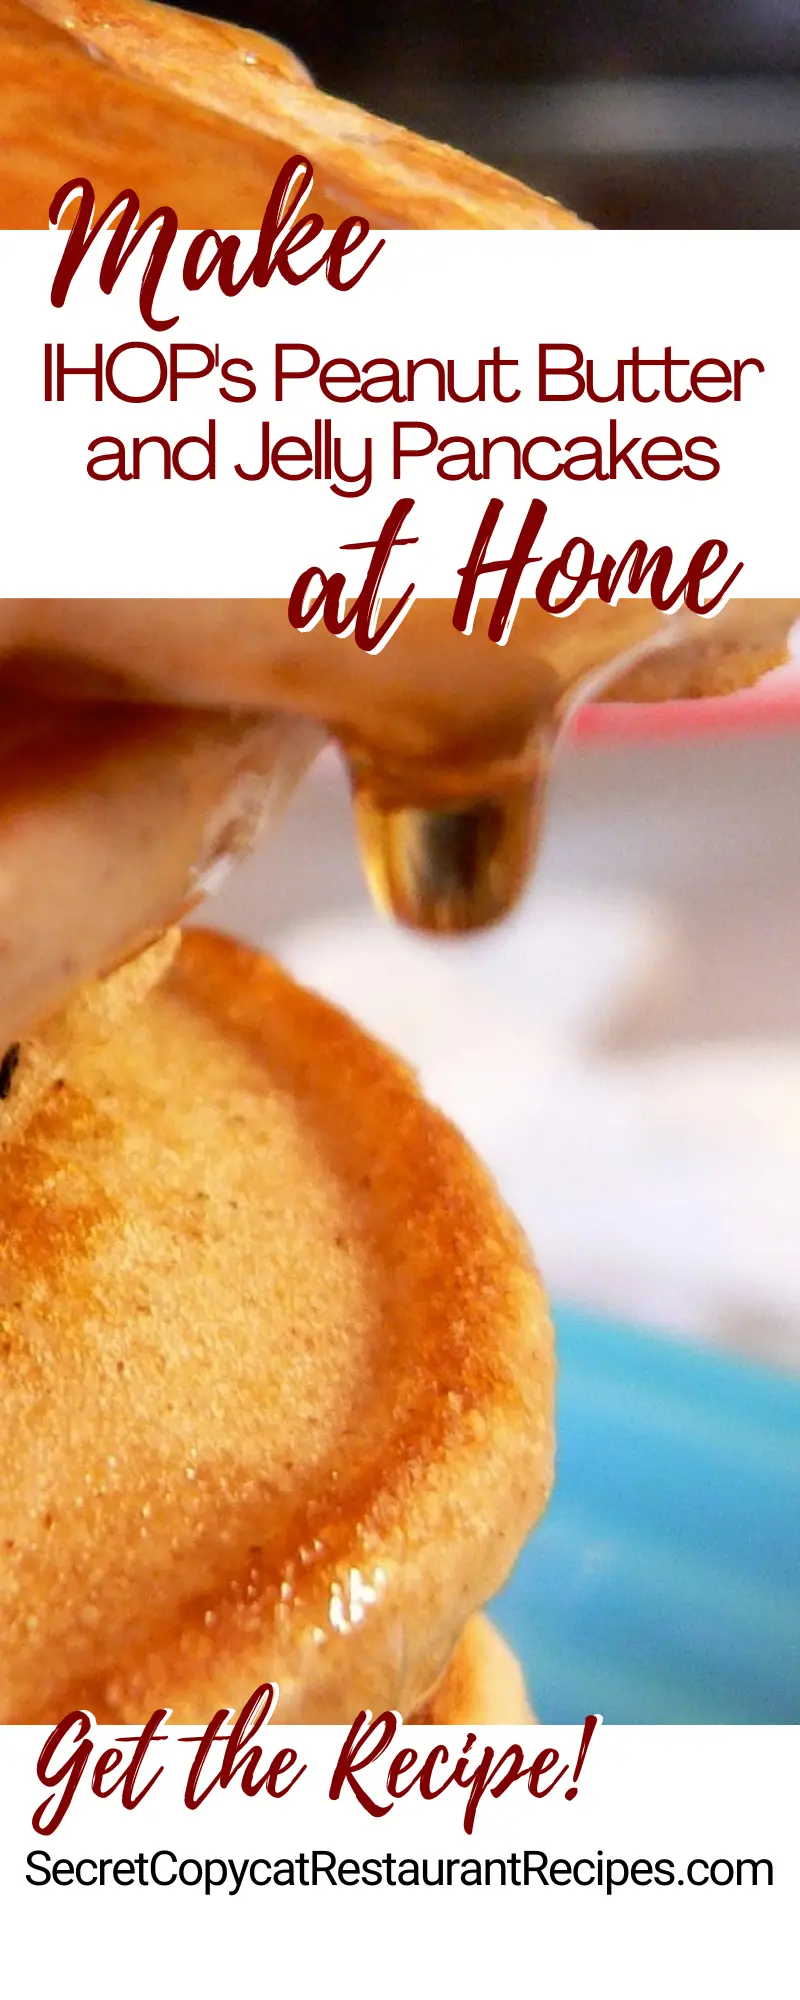 IHOP Peanut Butter and Jelly Pancakes Recipe